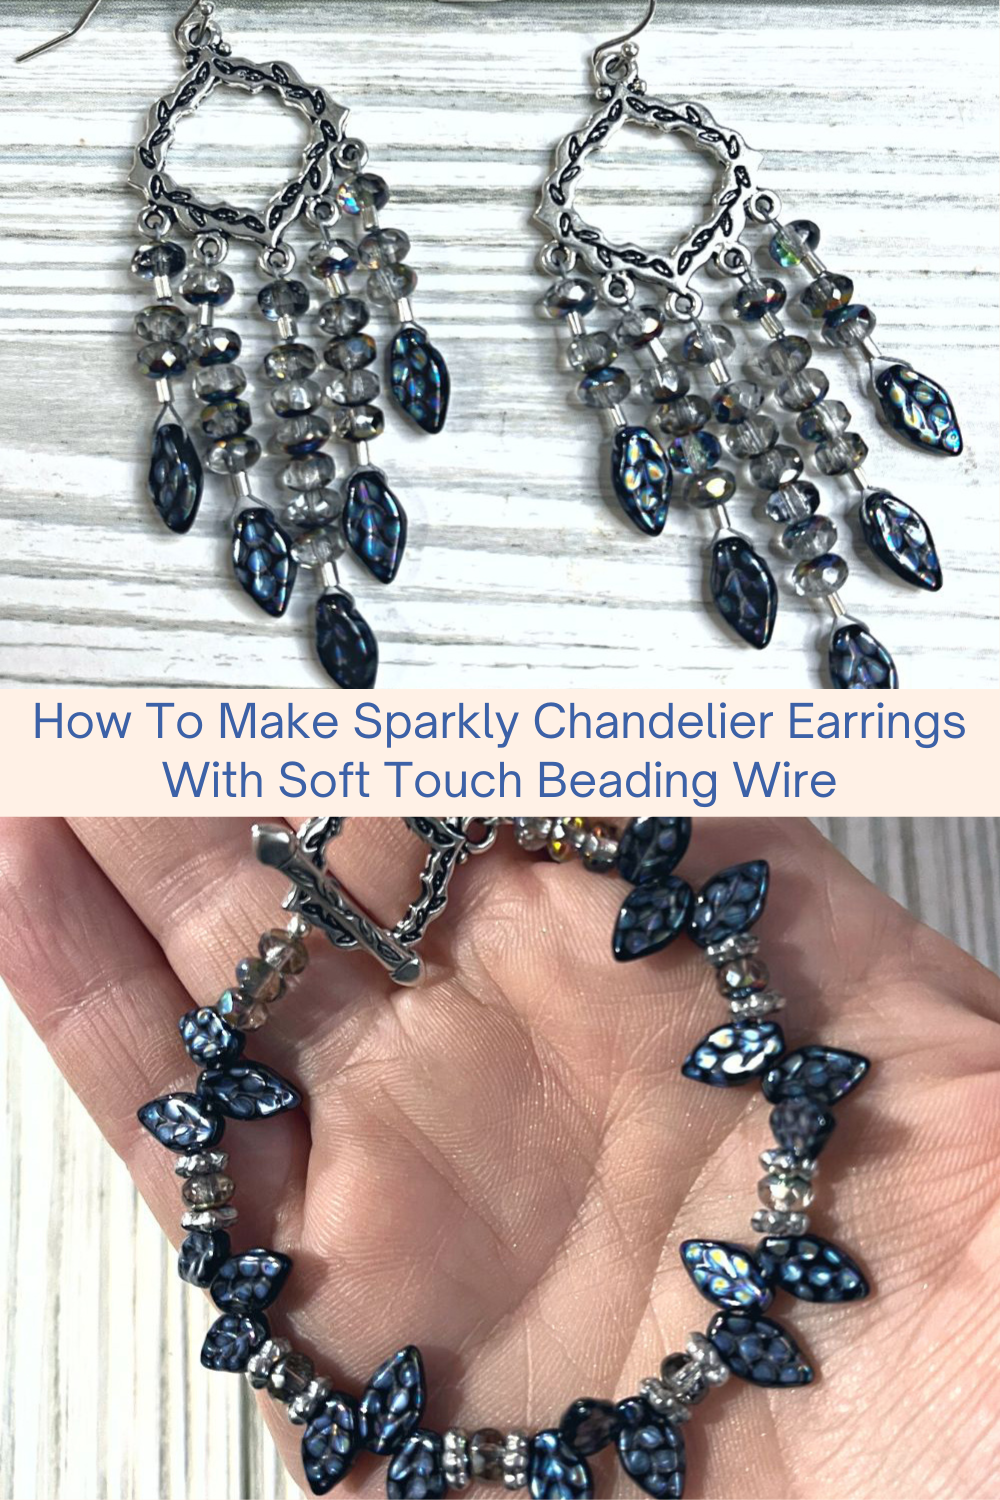 How To Make Sparkly Chandelier Earrings With Soft Touch Beading Wire Collage